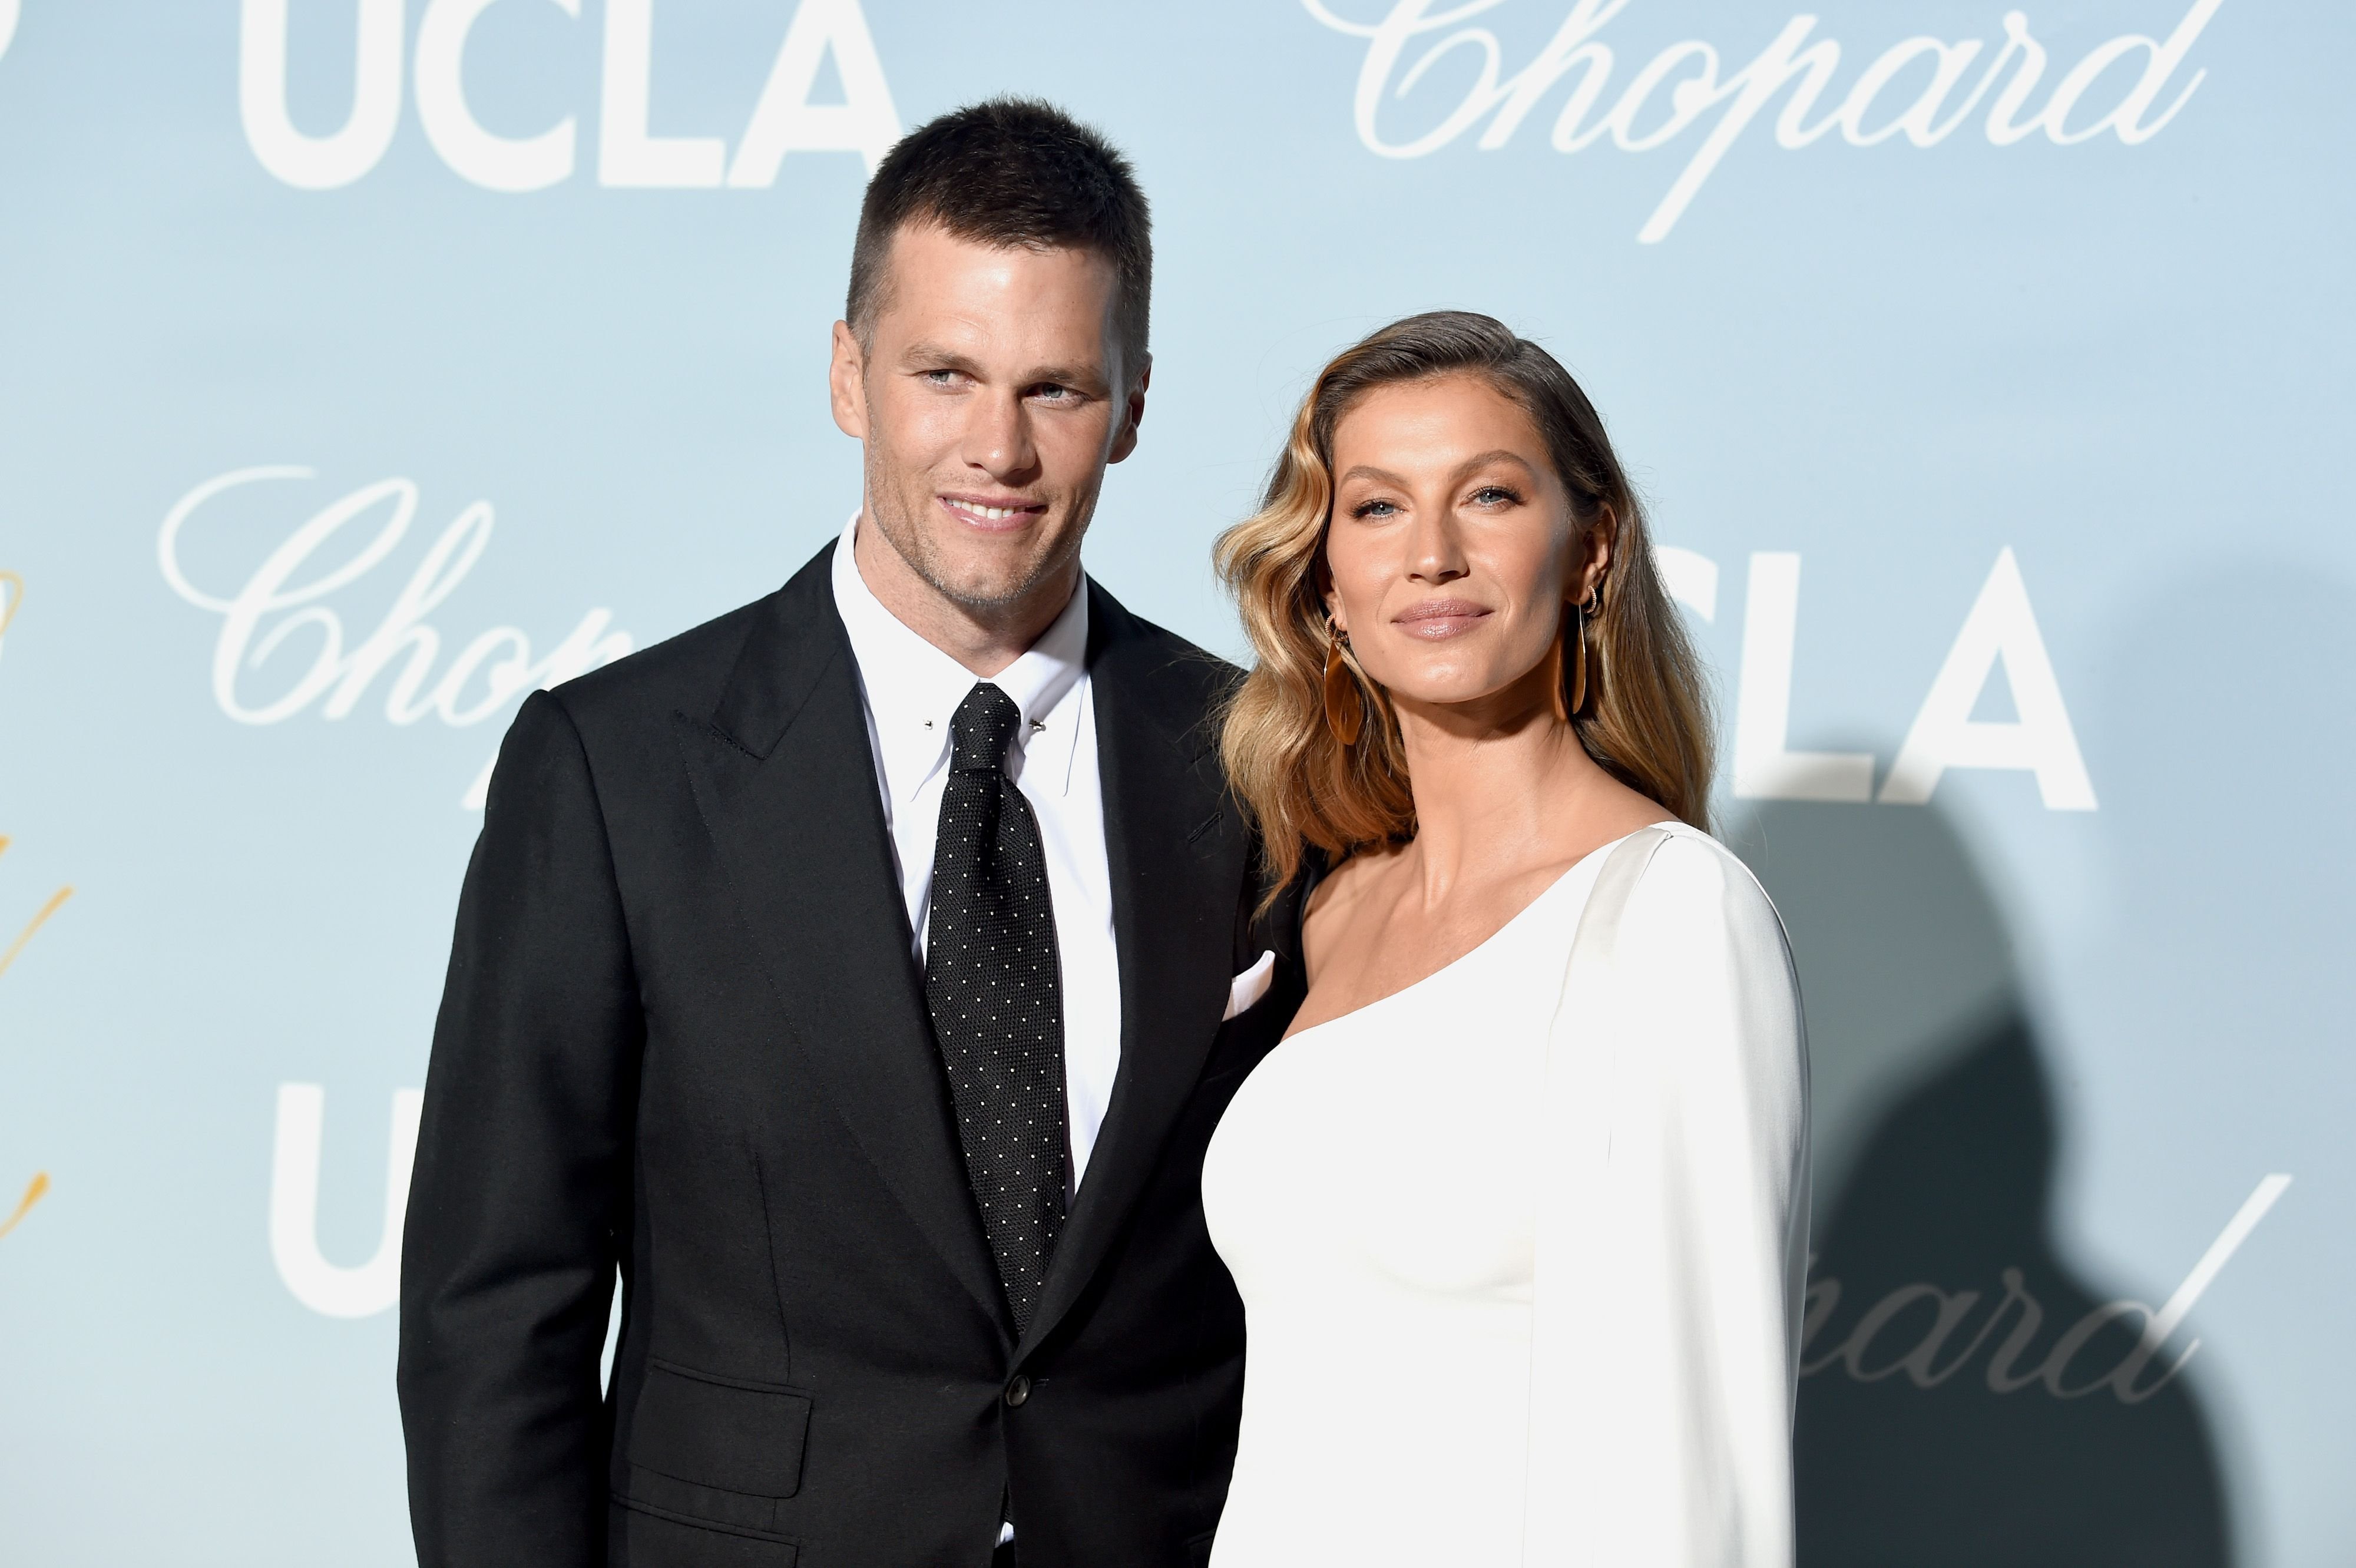 Tom Brady and Gisele Bündchen at the 2019 Hollywood For Science Gala at Private Residence on February 21, 2019 in Los Angeles, California | Source: Getty Images